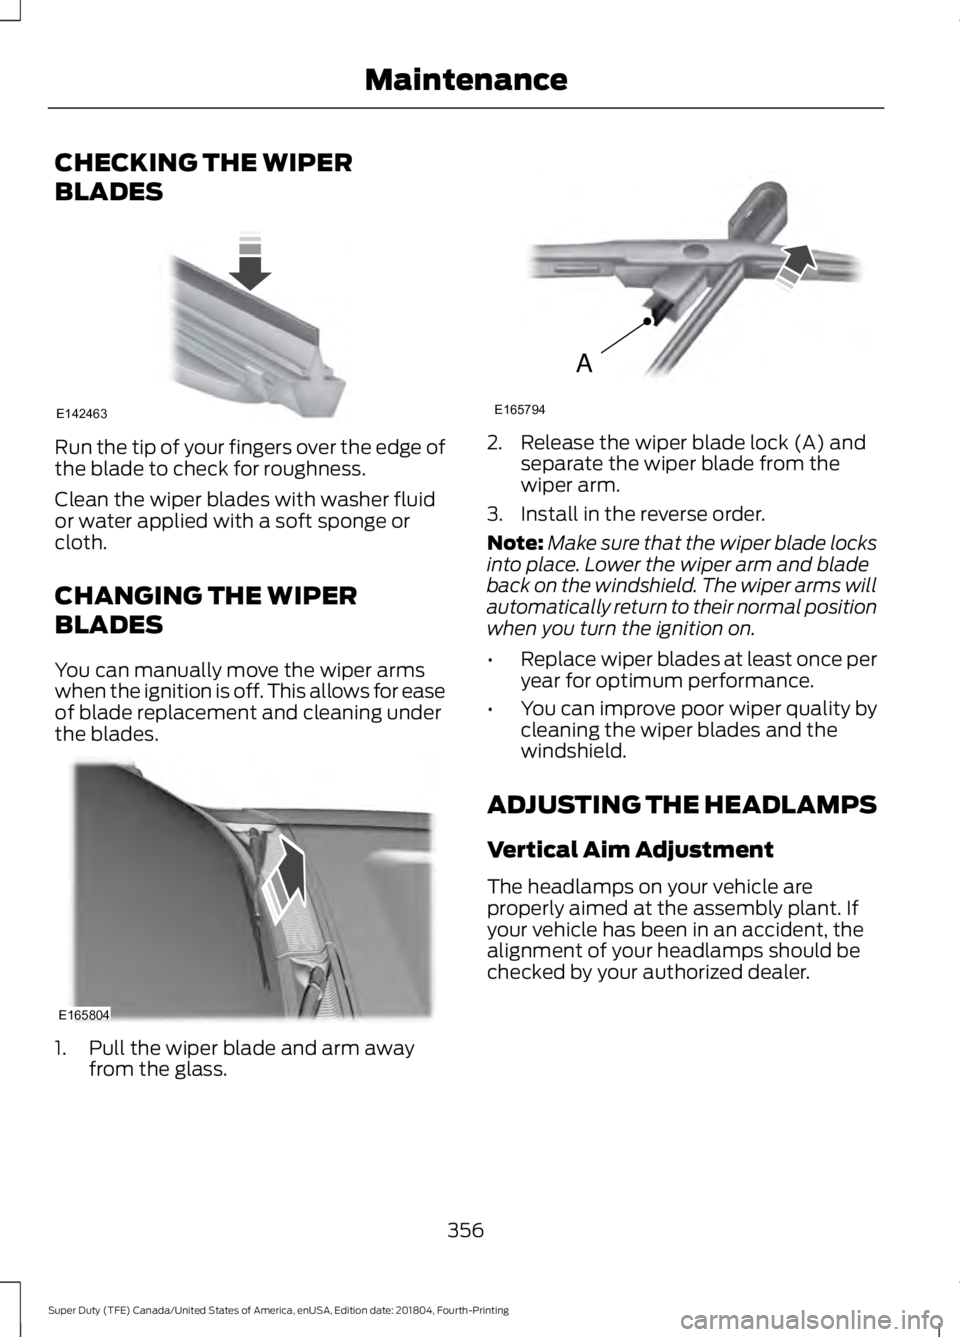 FORD SUPER DUTY 2019  Owners Manual CHECKING THE WIPER
BLADES
Run the tip of your fingers over the edge of
the blade to check for roughness.
Clean the wiper blades with washer fluid
or water applied with a soft sponge or
cloth.
CHANGING